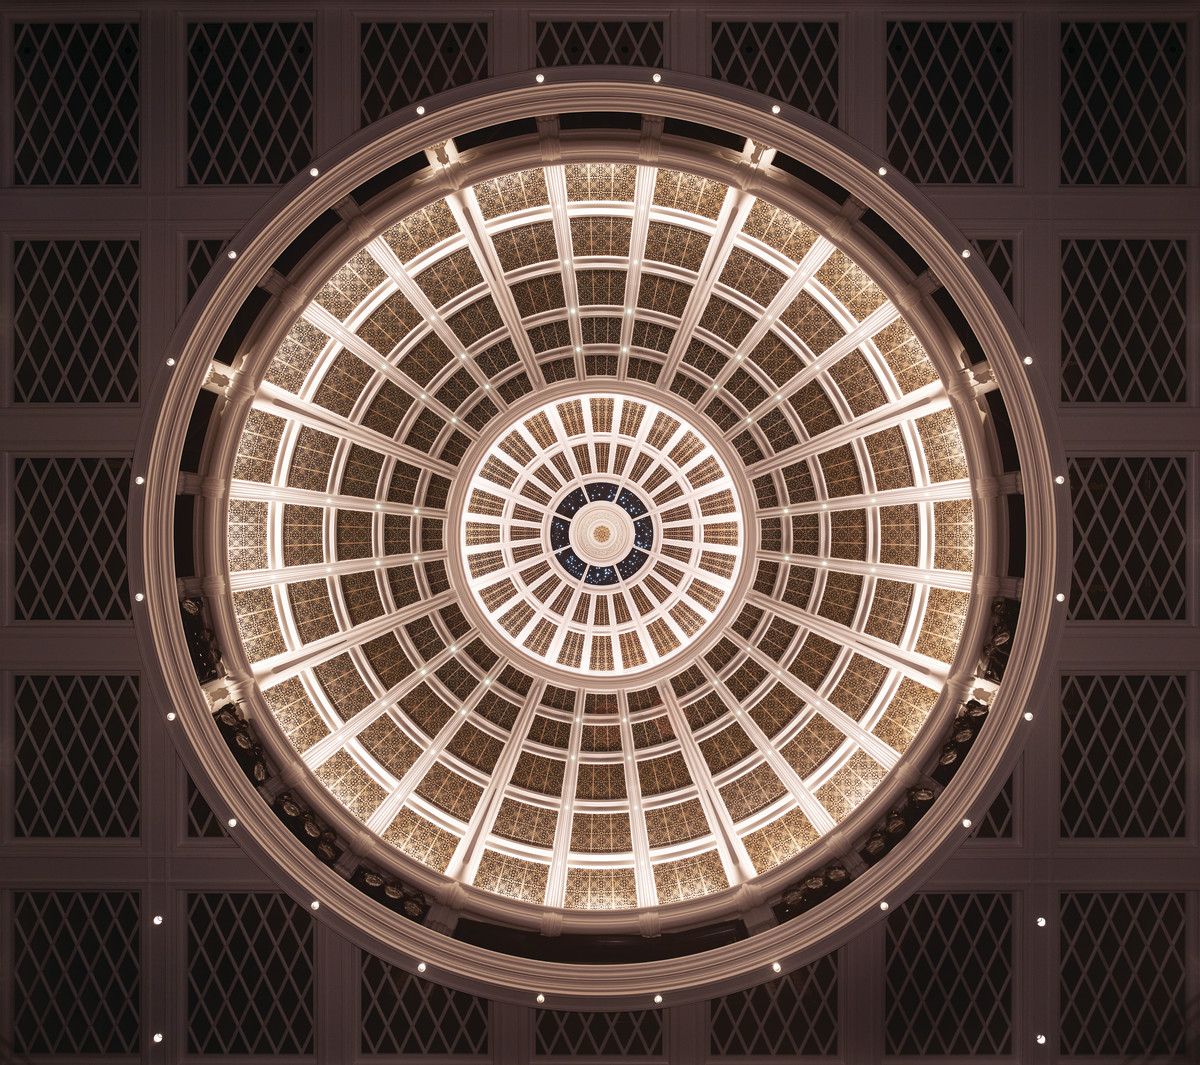 The main hall’s ceiling dome is acoustically transparent to enhance the sound quality of the performing arts center.